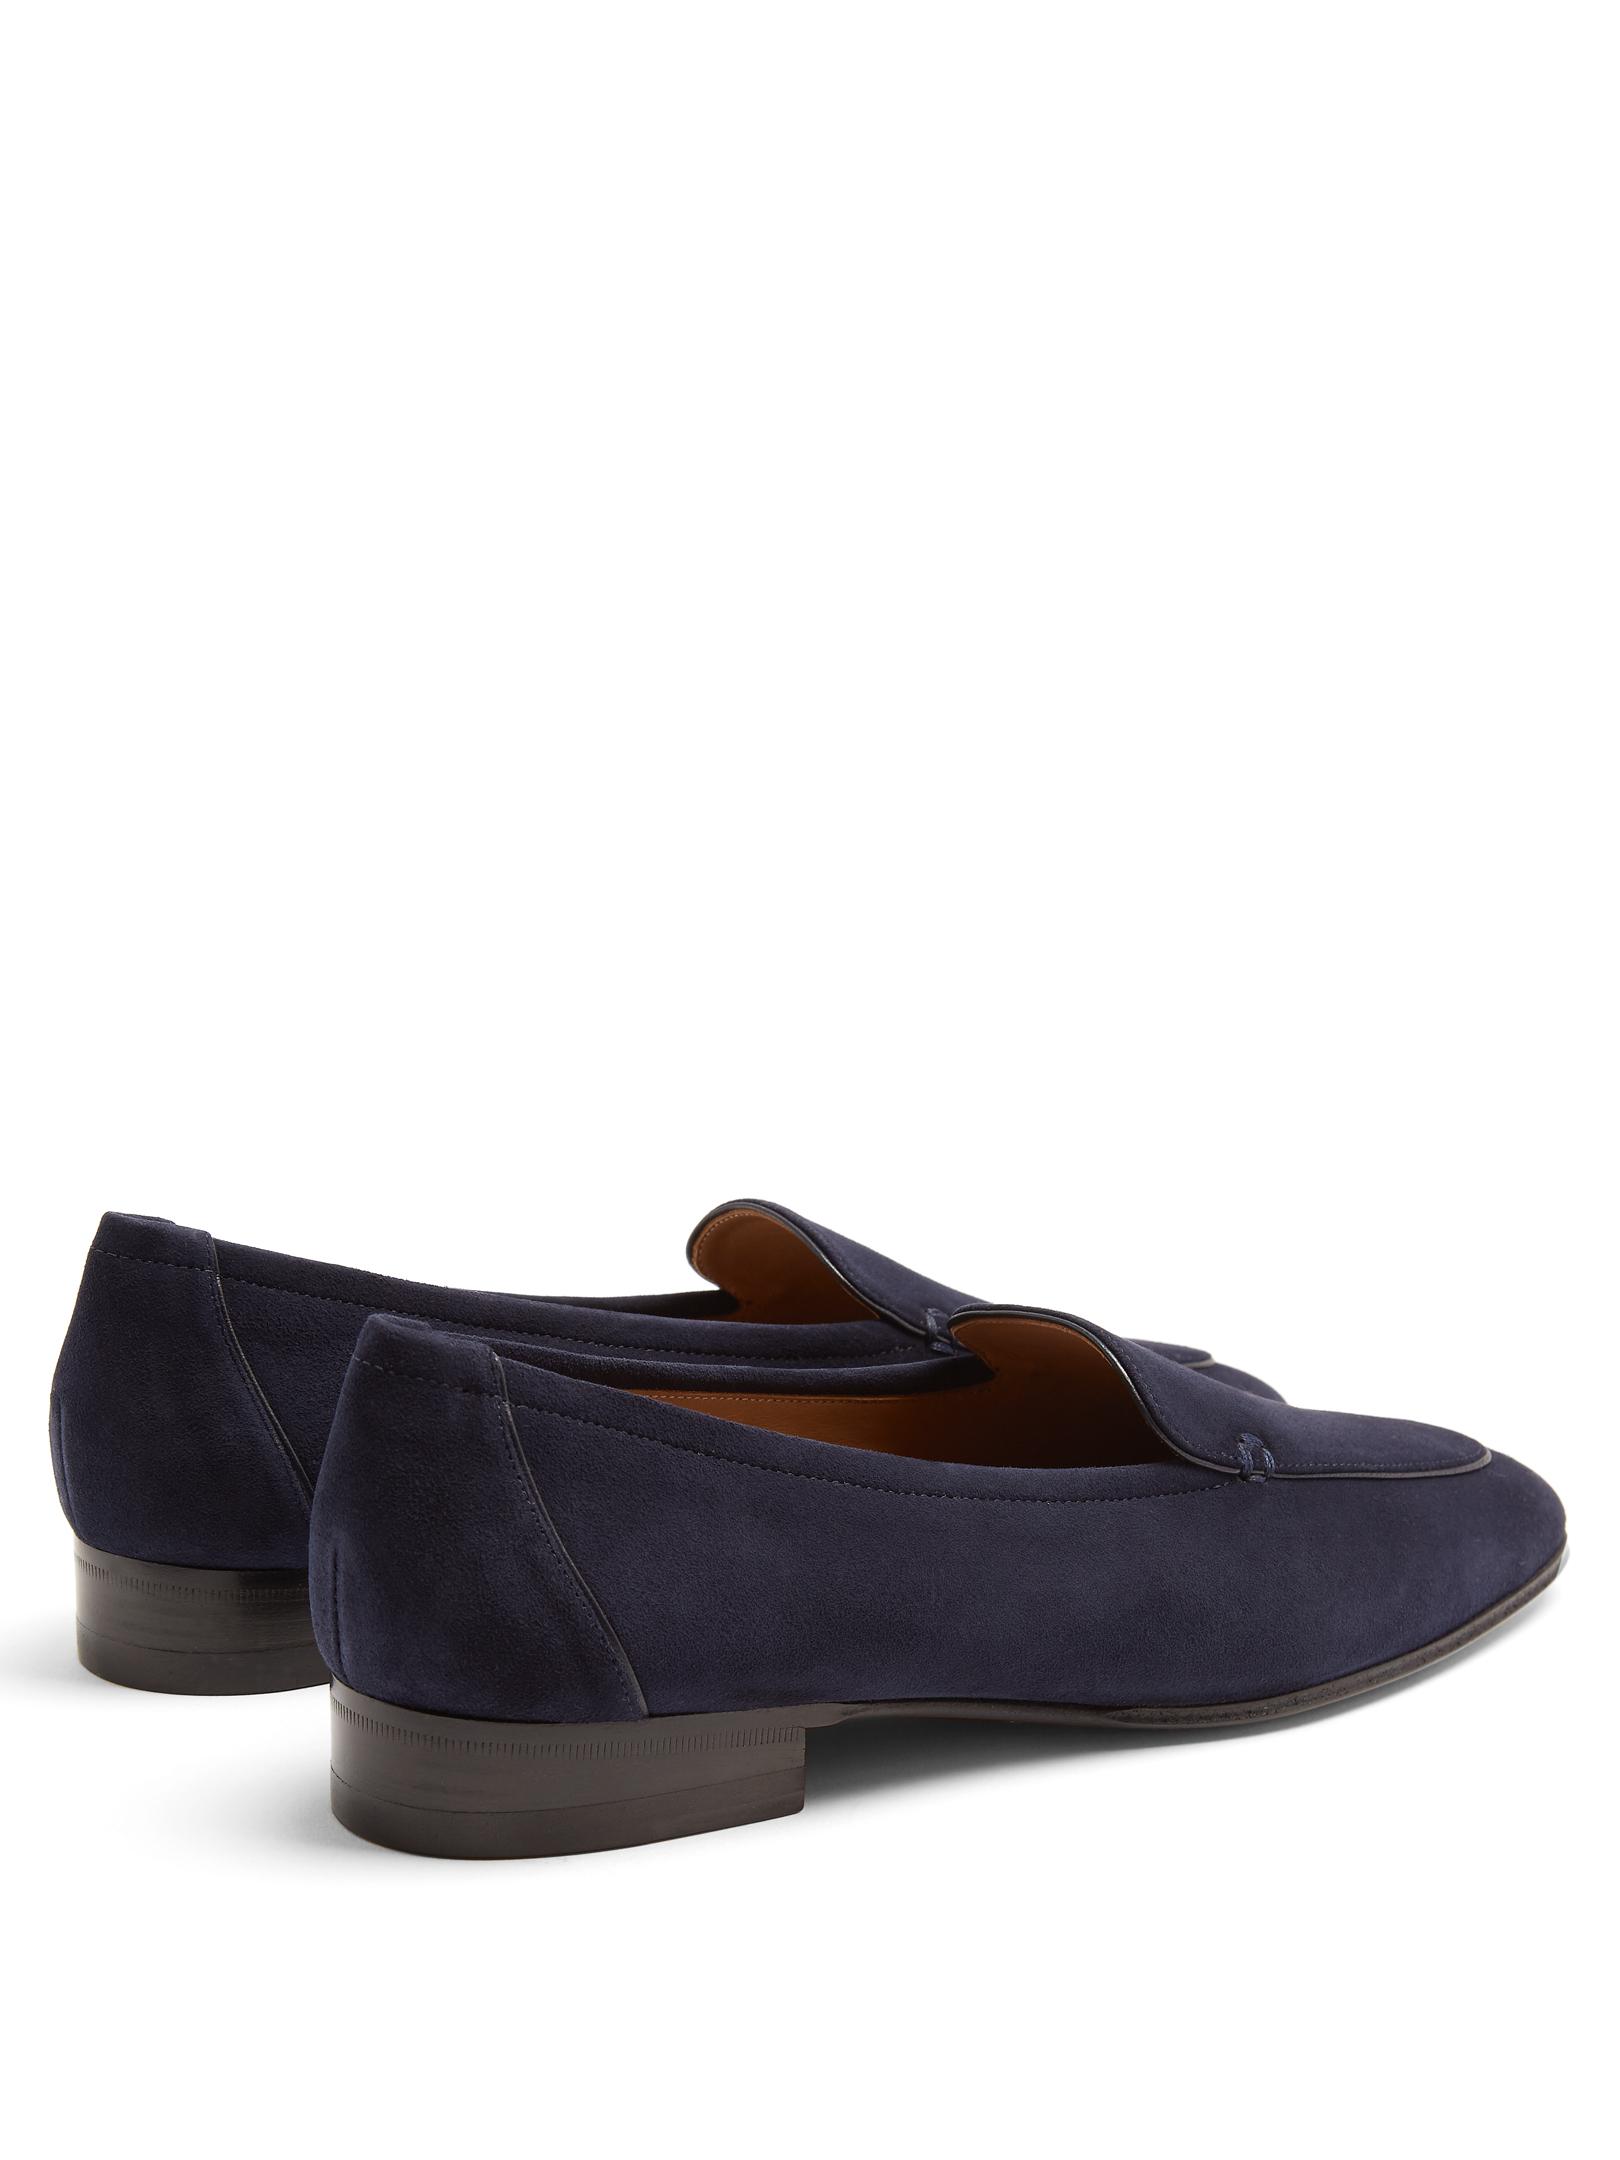 The Row Adam Suede Loafers in Navy (Blue) - Lyst